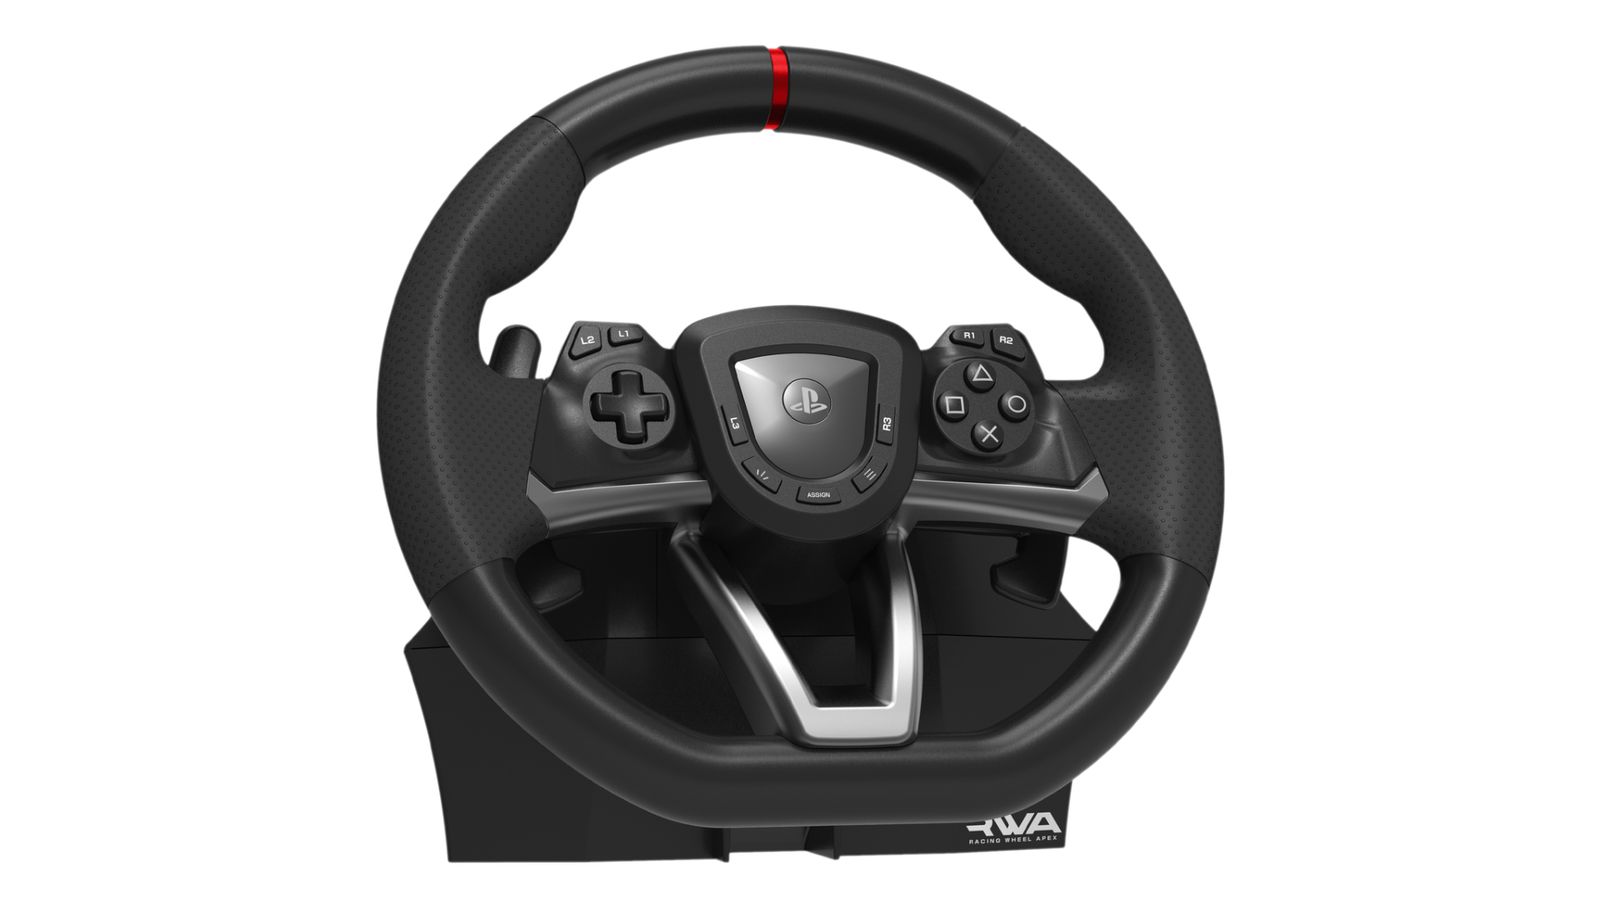 Hori Racing Wheel Apex product image of a black wheel with a red centre mark.